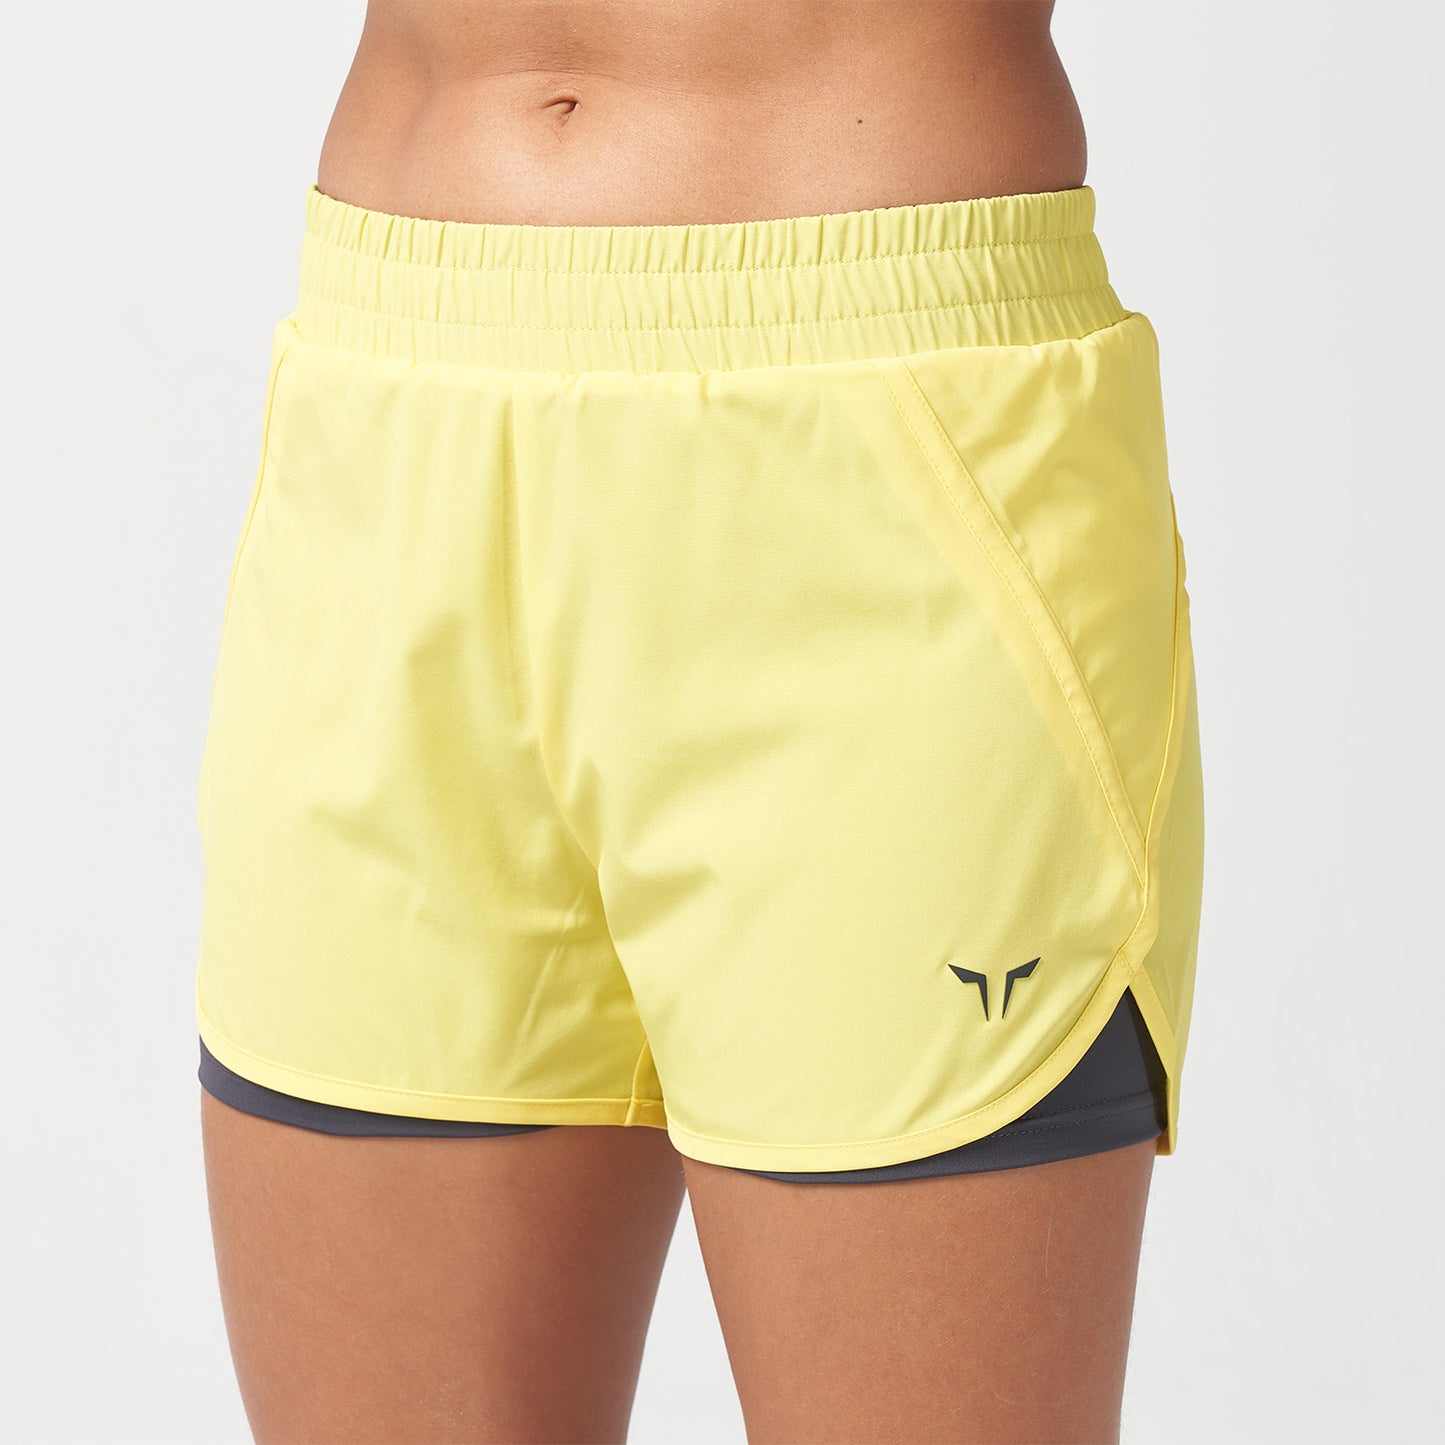 squatwolf-workout-clothes-lab360-never-stop-2-In-1-shorts-yellow-gym-shorts-for-women